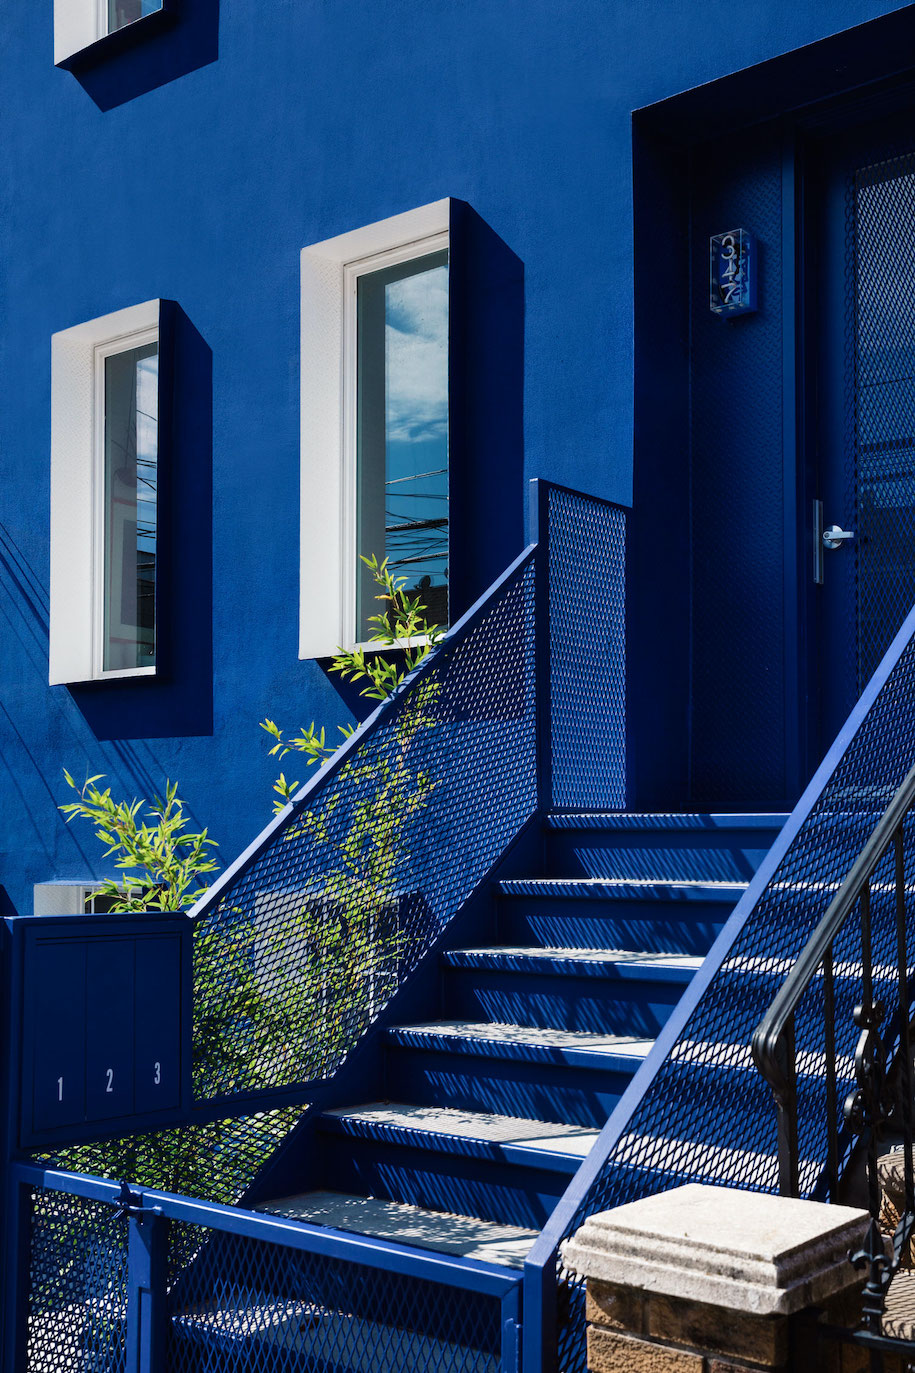 Archisearch LOT designed The Blue Building private townhouse located in Brooklyn